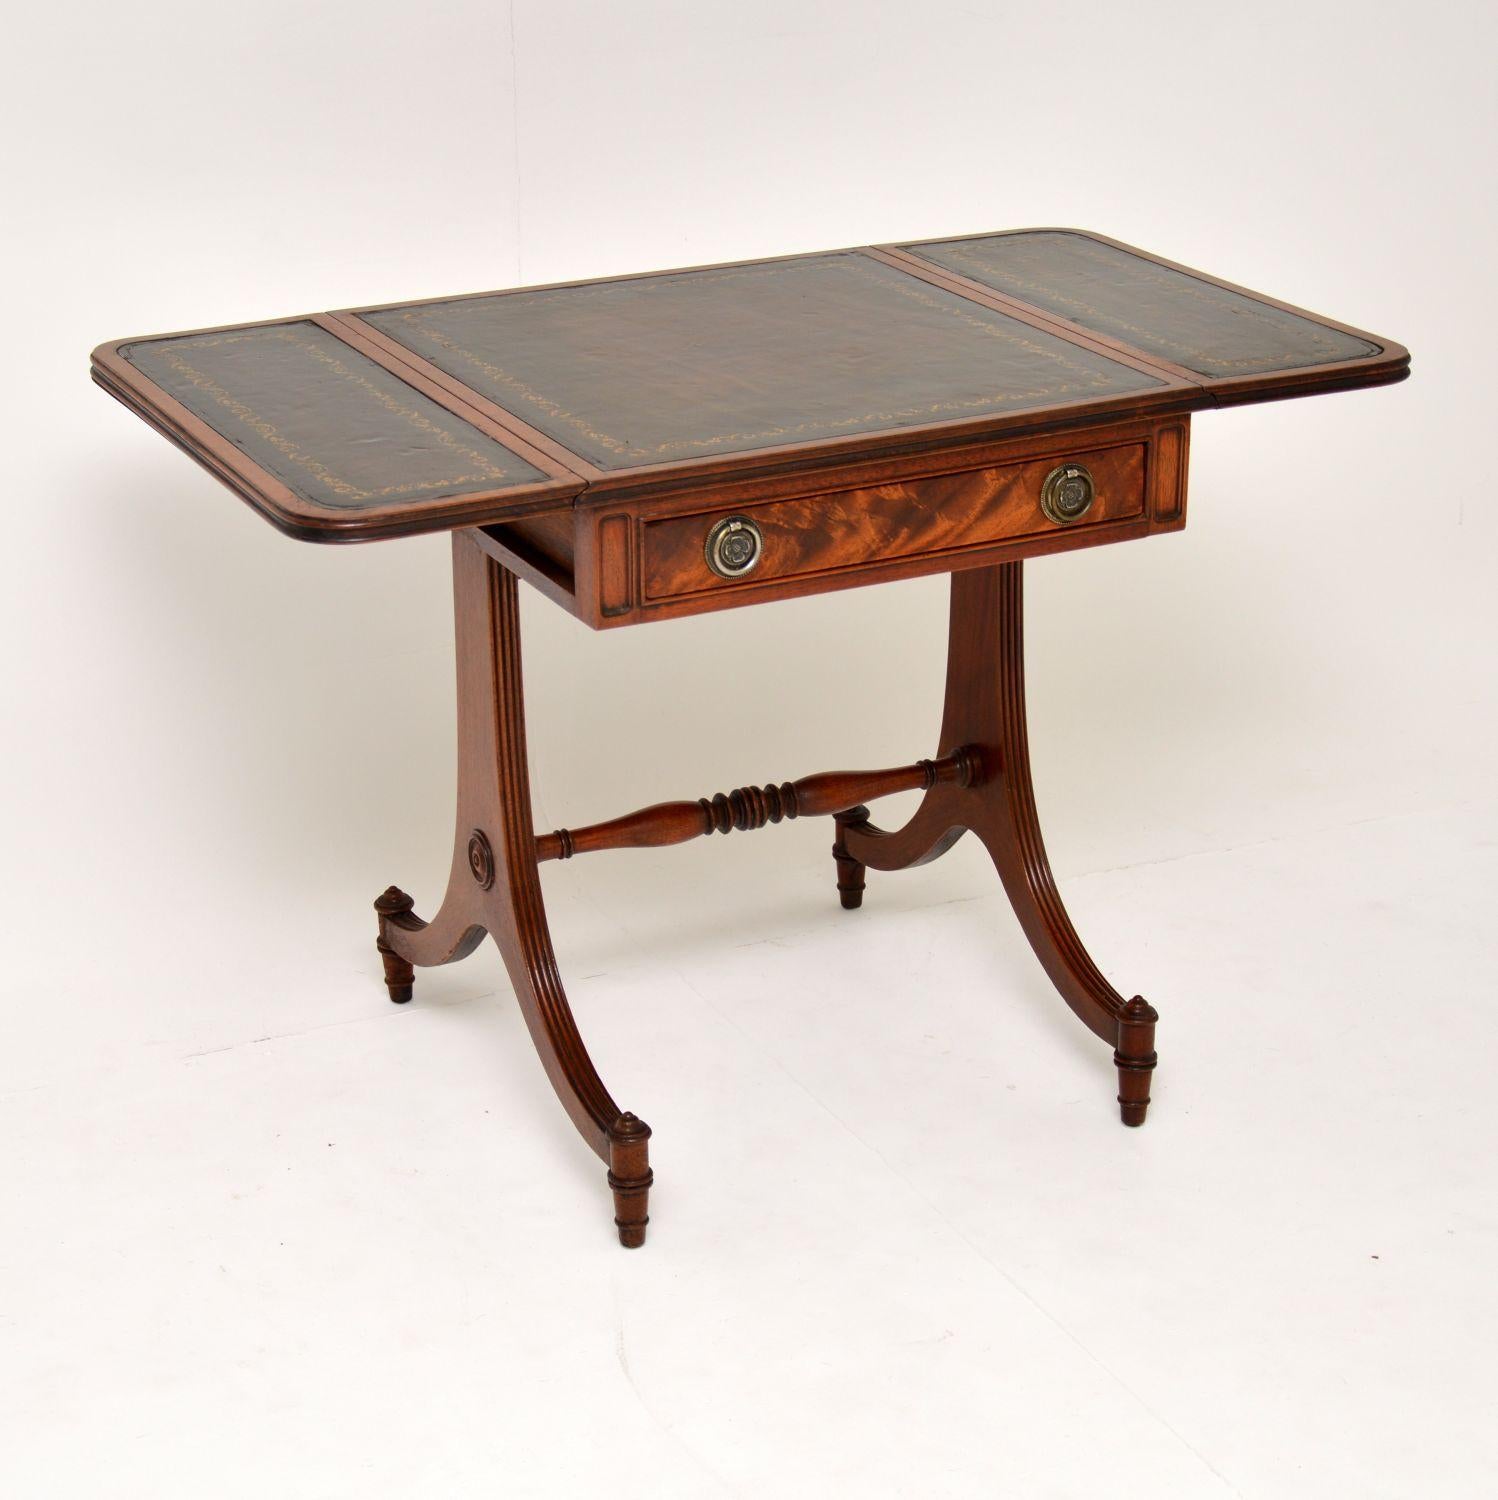 Antique Regency style mahogany drop-leaf side table with tooled leather insets on the top surfaces.

It’s fine quality, in very good condition and dates to circa 1950s period.

There is one drawer on the front with brass handles and a matching